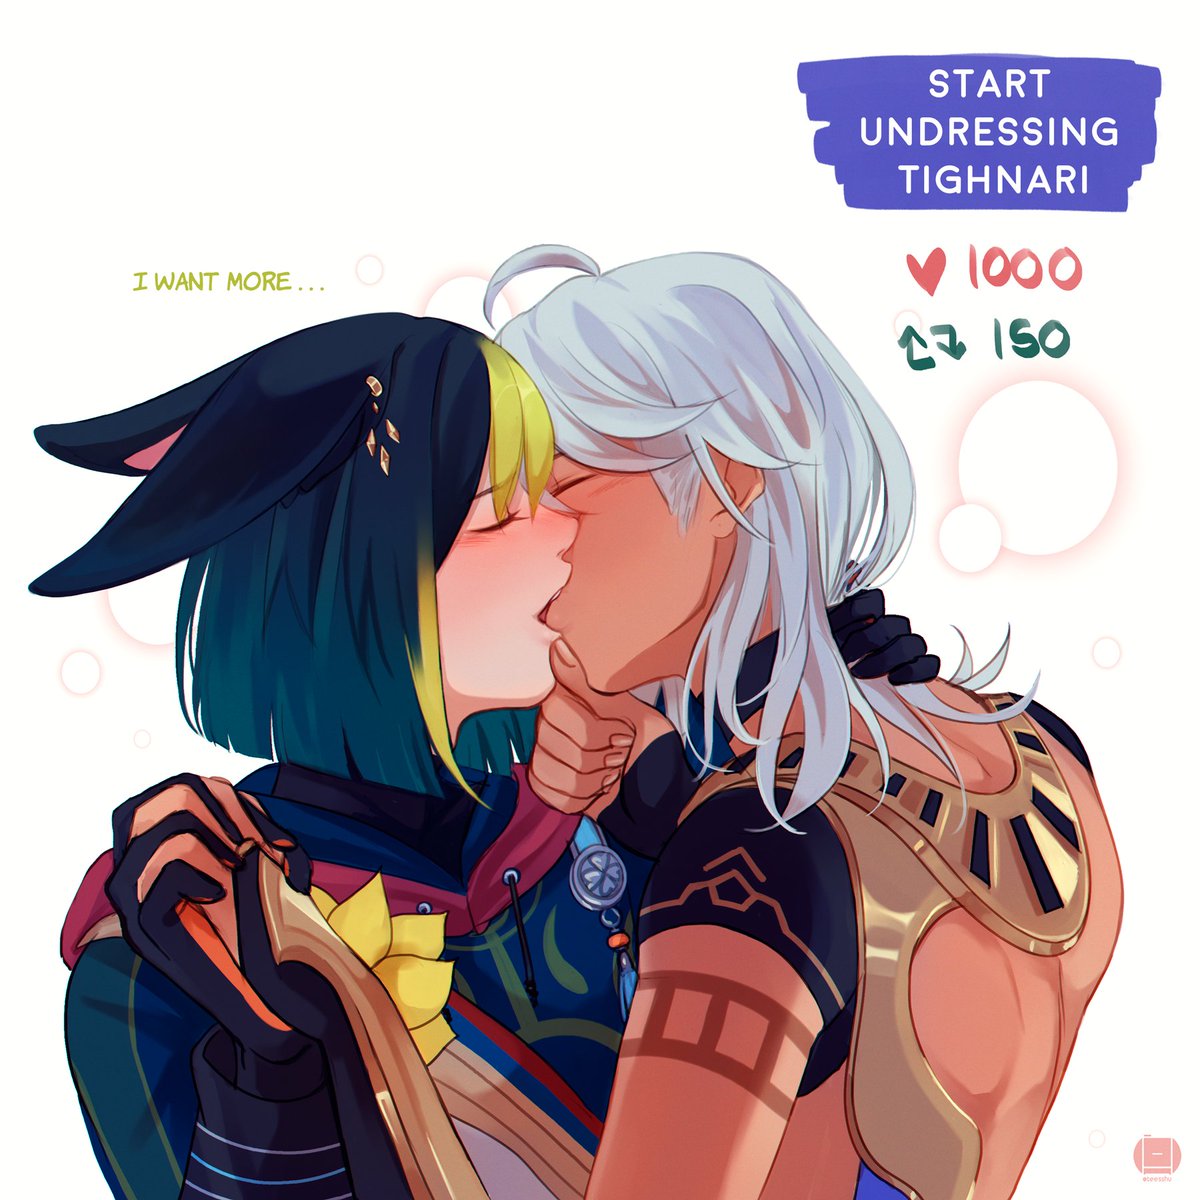 art train ✨💖

I'm in cynonari hell mostly. love making short and funny comics for my ships 💞

tag @Uselesschat24h @Nevulaee @svifian8 @virideink @crnix @hukiolukio https://t.co/RUounpcvtR 